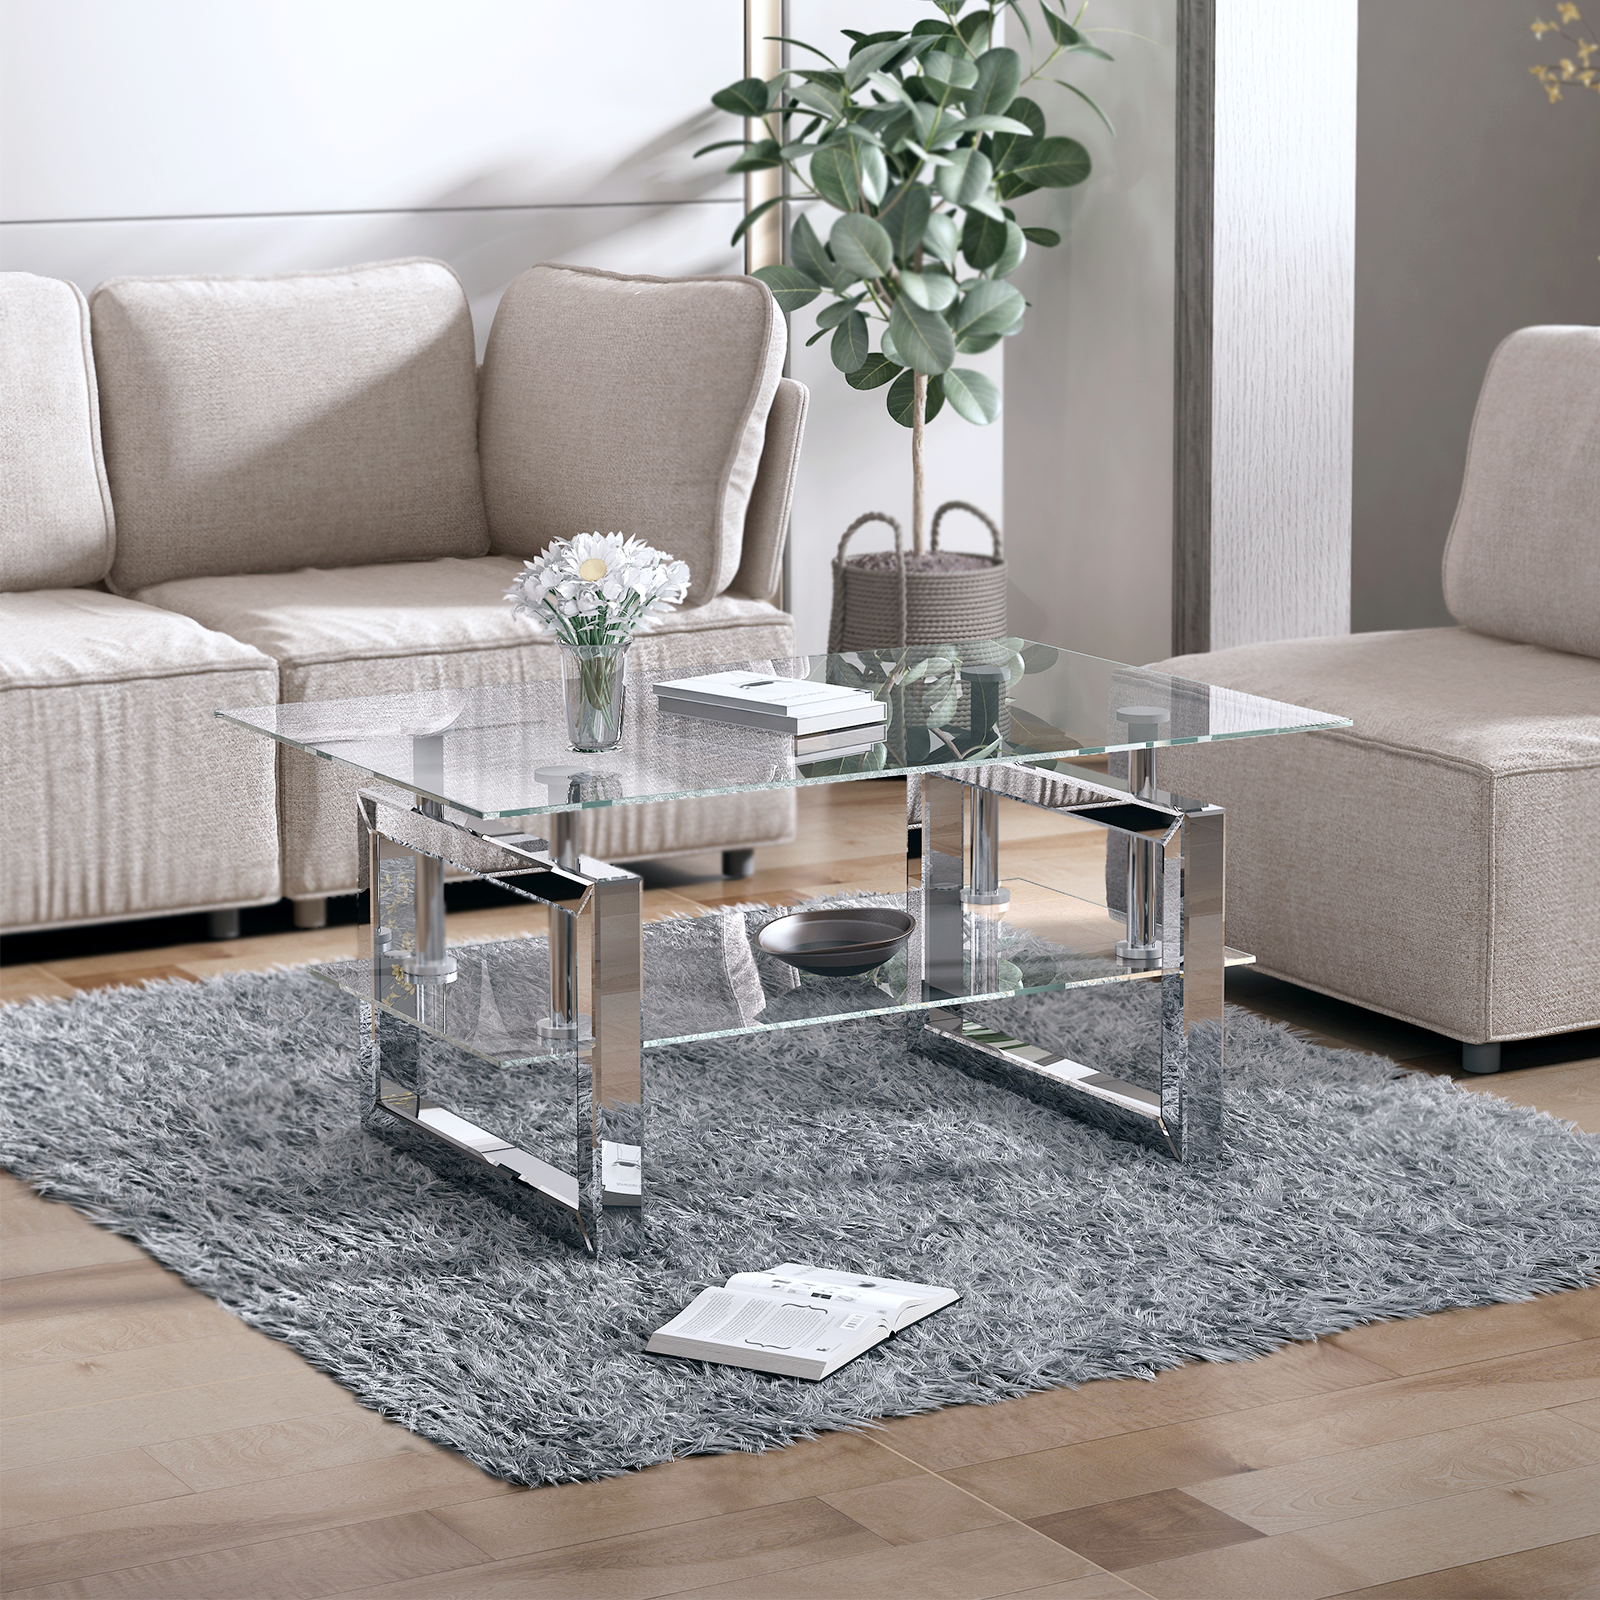 Mjkone Mirrored Coffee Table with 2 Mirror Square Legs, Glass Tables for Living Room, Glass Coffee Table, Modern Coffee Table, Center Table for Living Room/Office